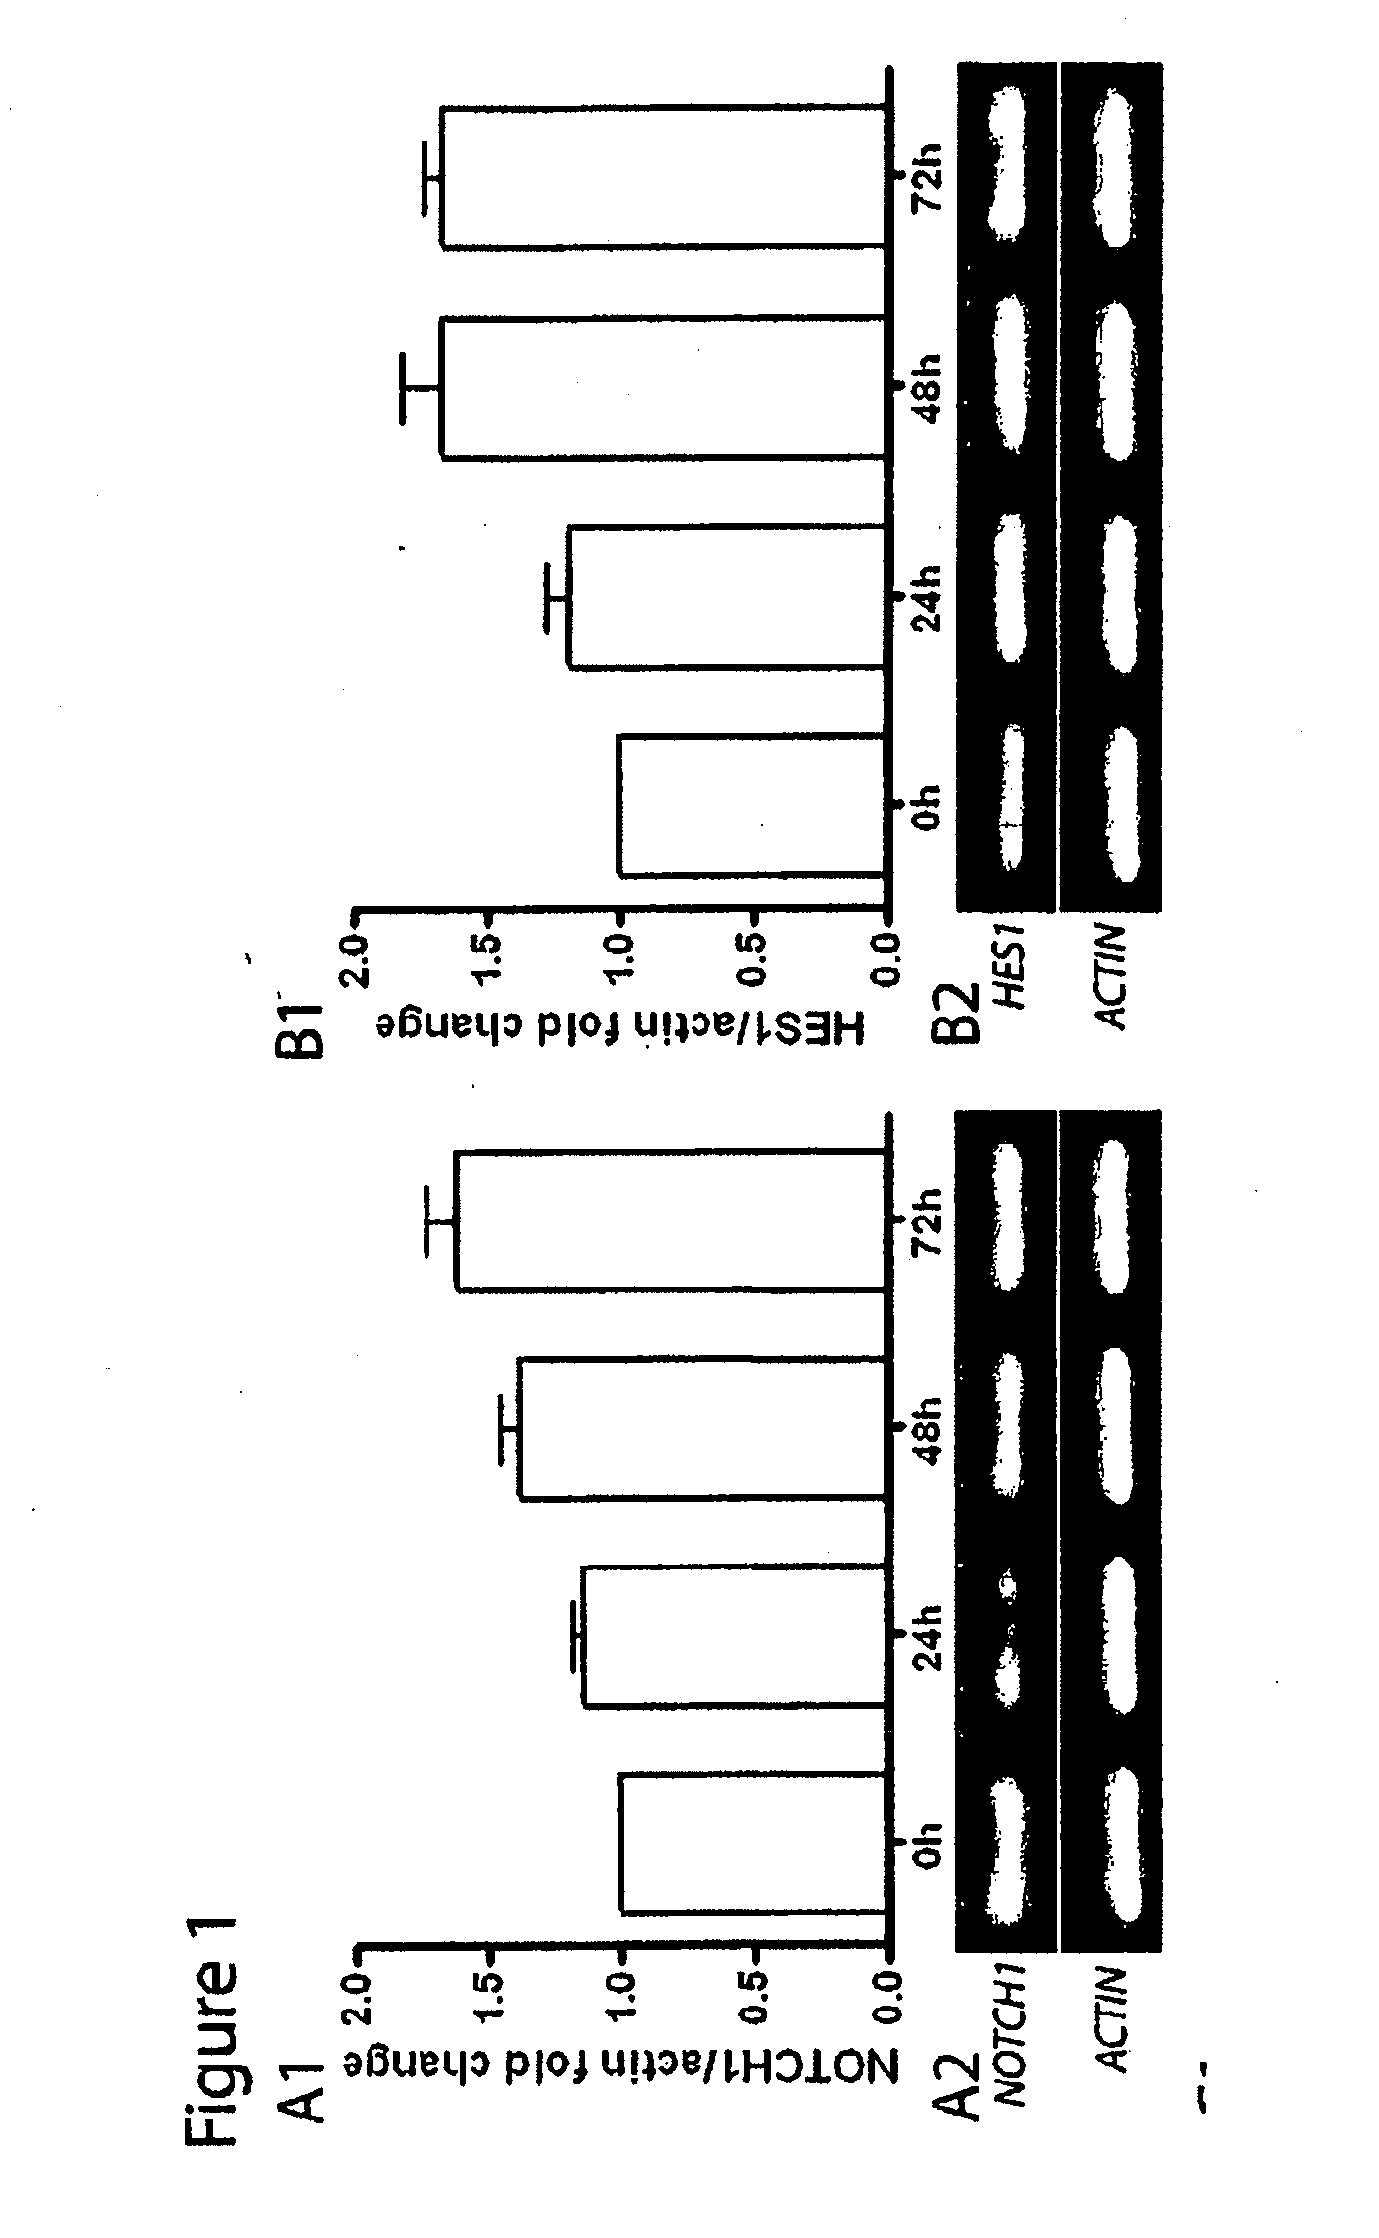 Method for generating islet beta cells from dedifferentiated exocrine pancreatic cells